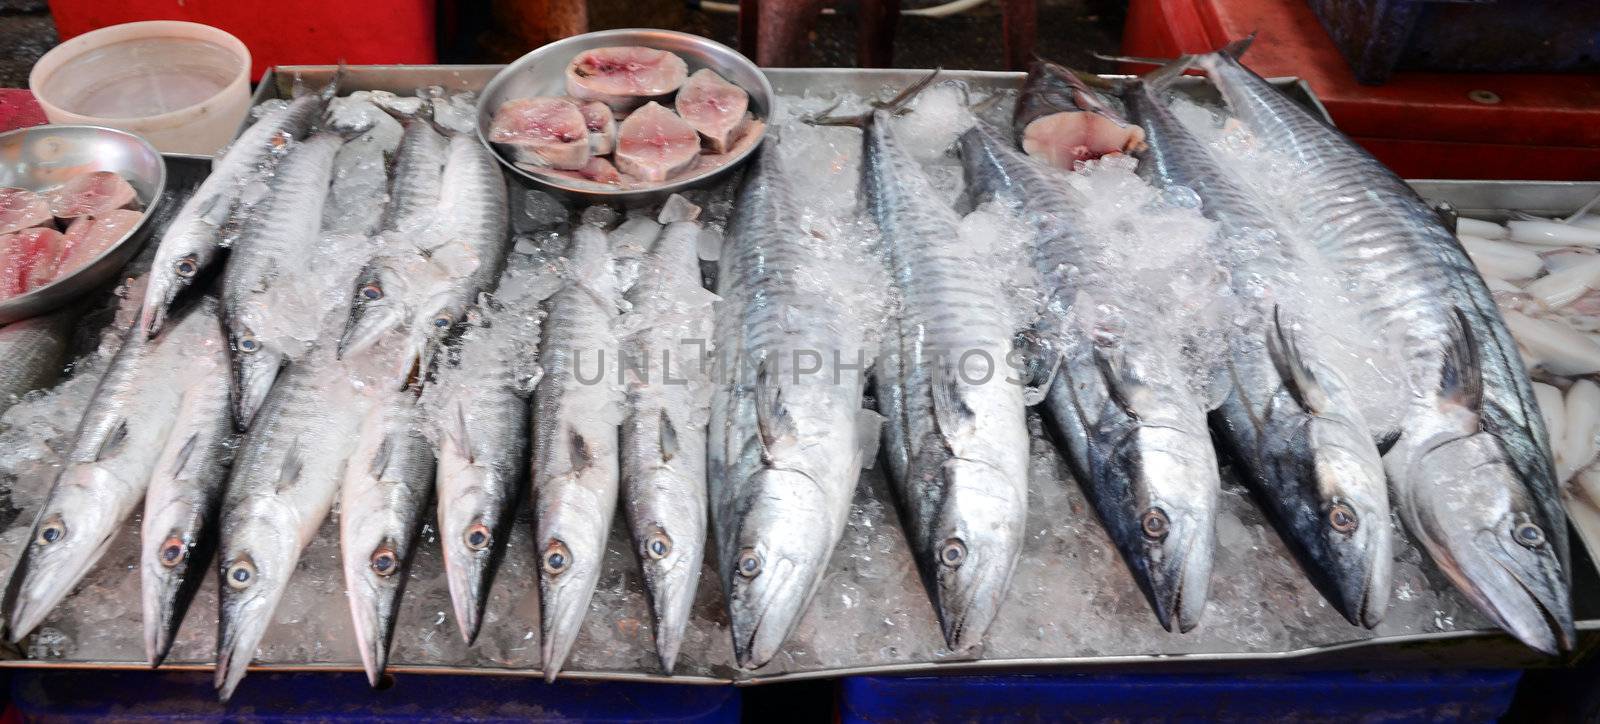 Variety of fresh fish seafood in market by siraanamwong